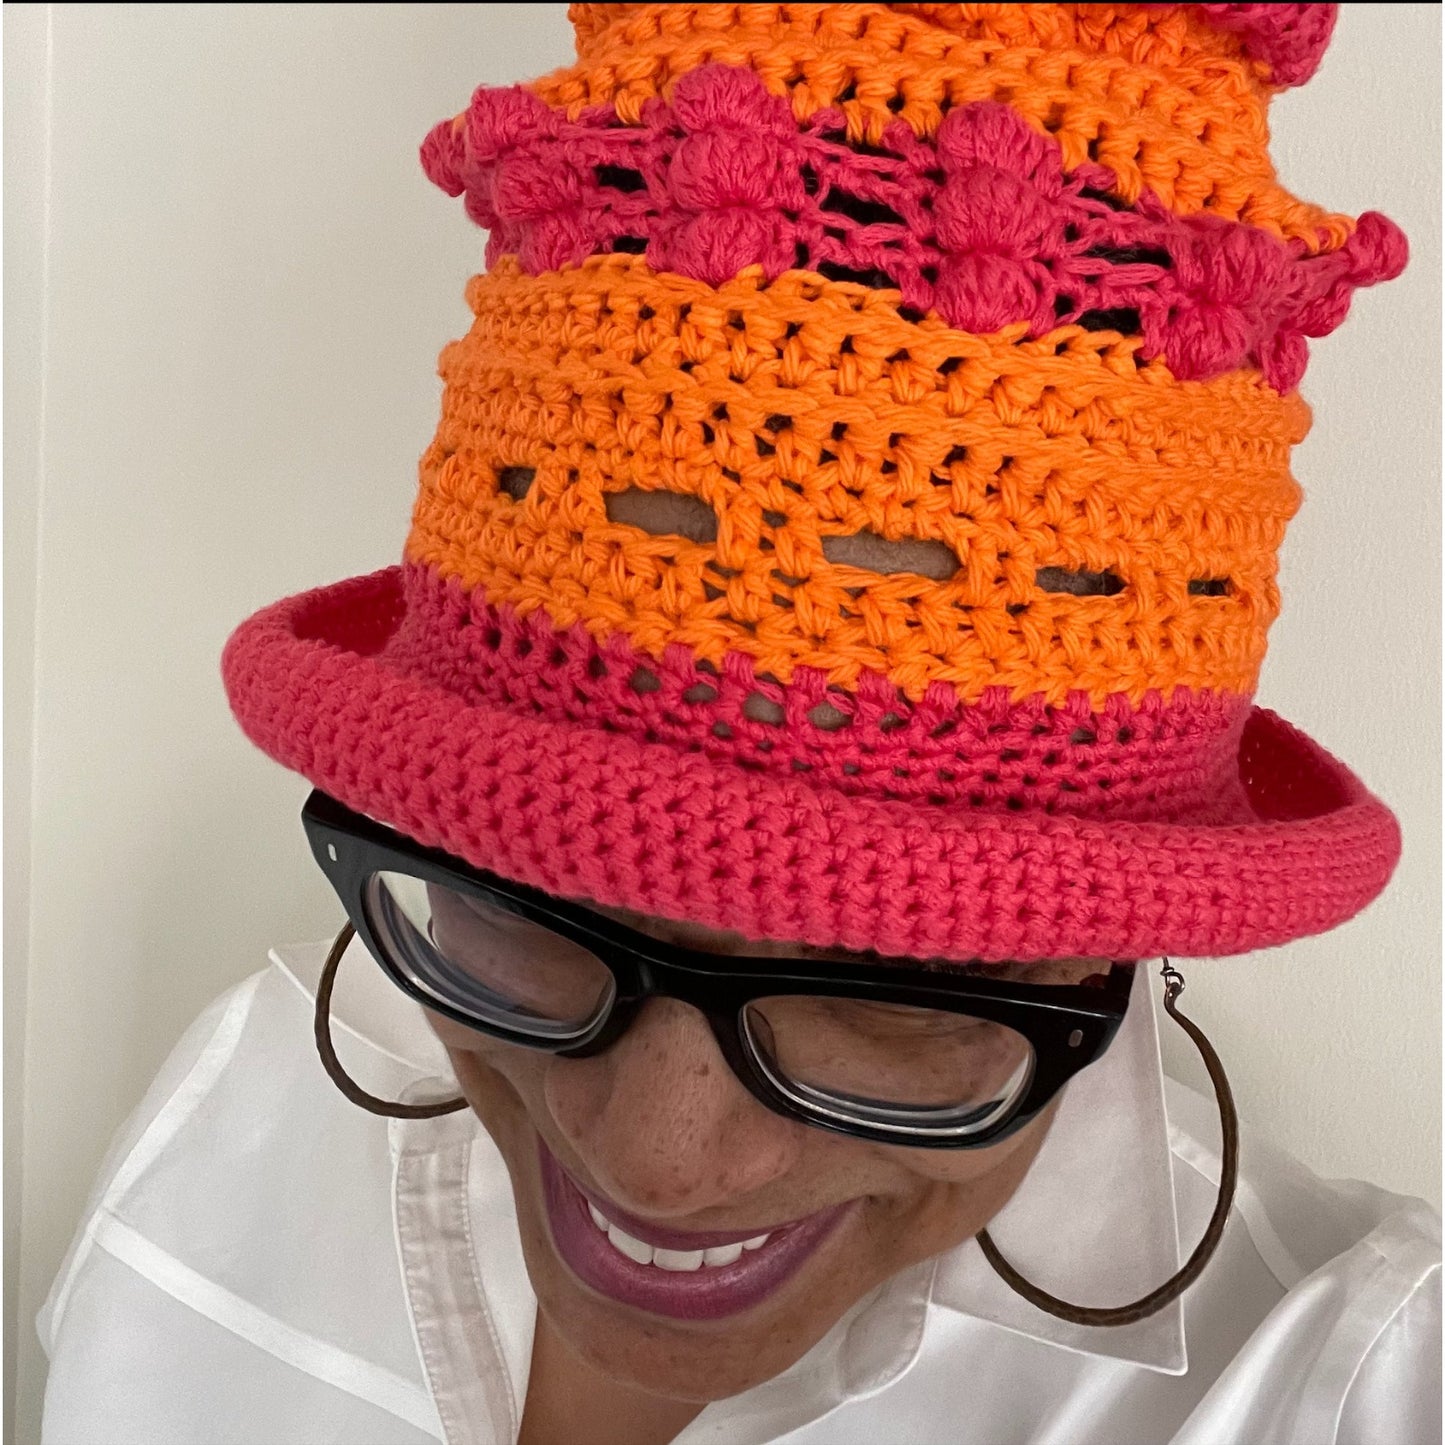 Yarn Gone Wild -Yarn Craft Crochet Hat From The All The Feels Spring Collection